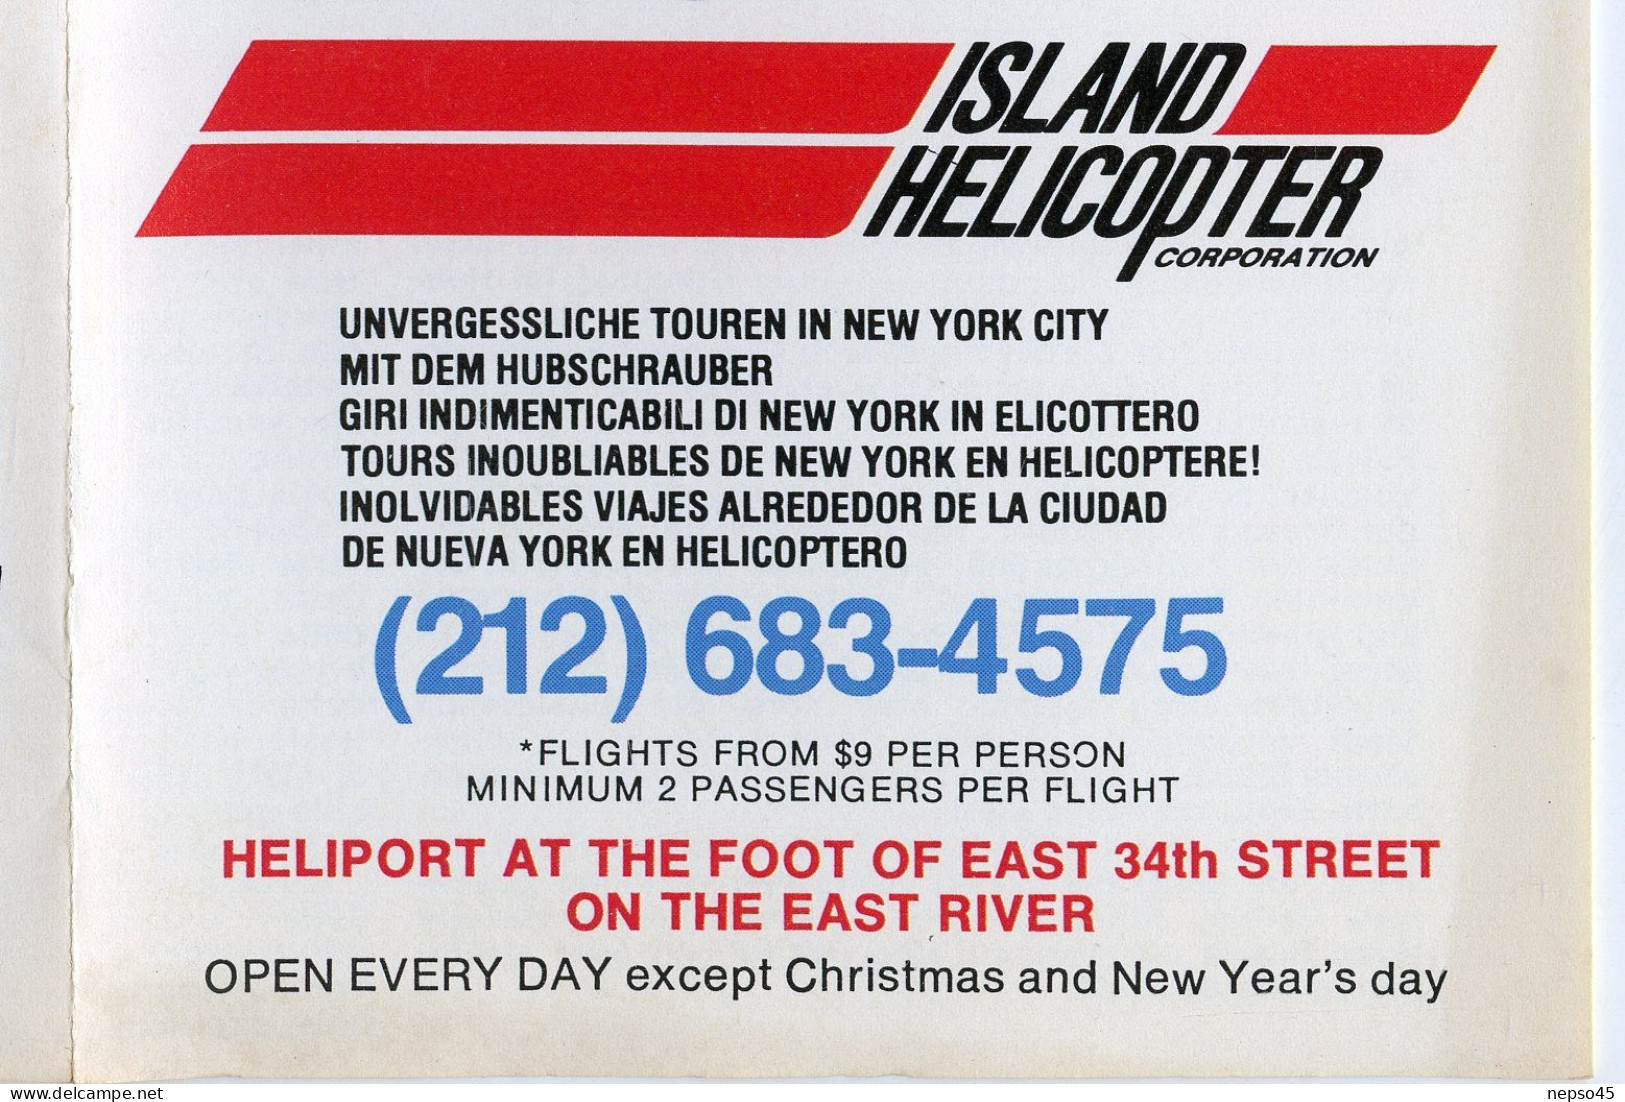 Dépliant touristique.Amérique.U.S.A.Sight-See New York by Helicopter.Island Helicopter Corporation.East River.